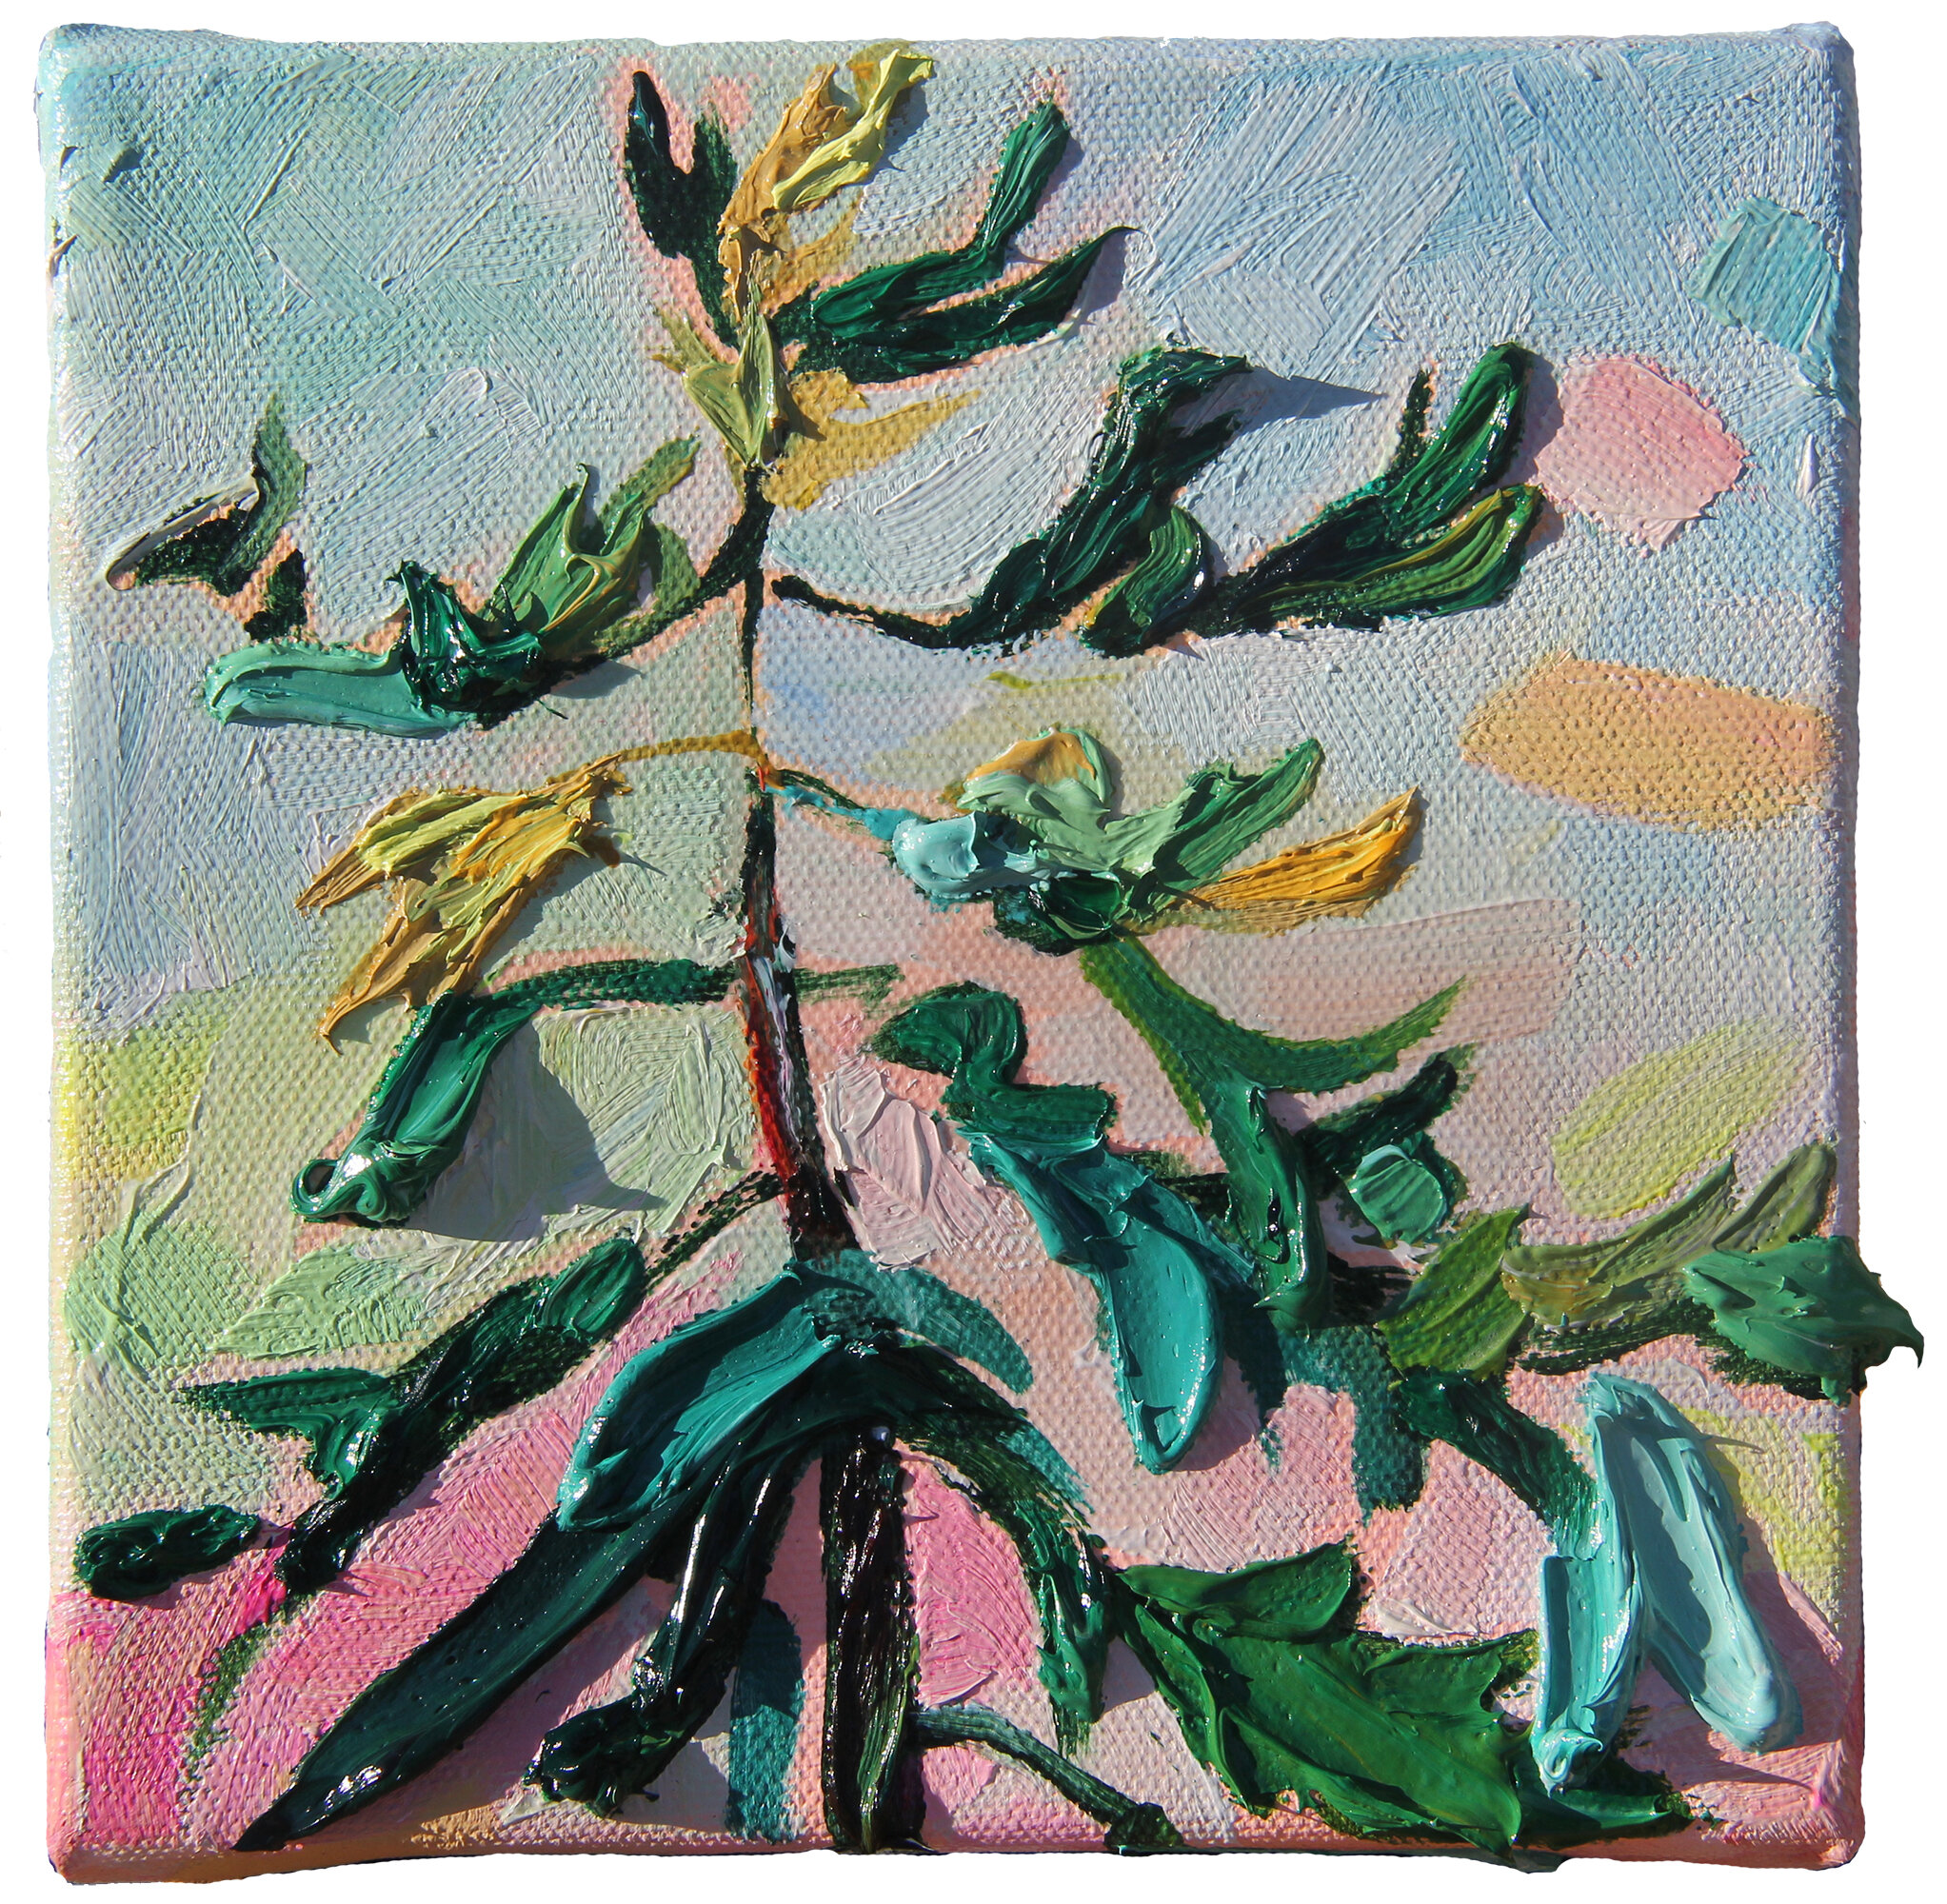 Clapping Tree, 6 x 6" oil and acrylic on canvas, 2020